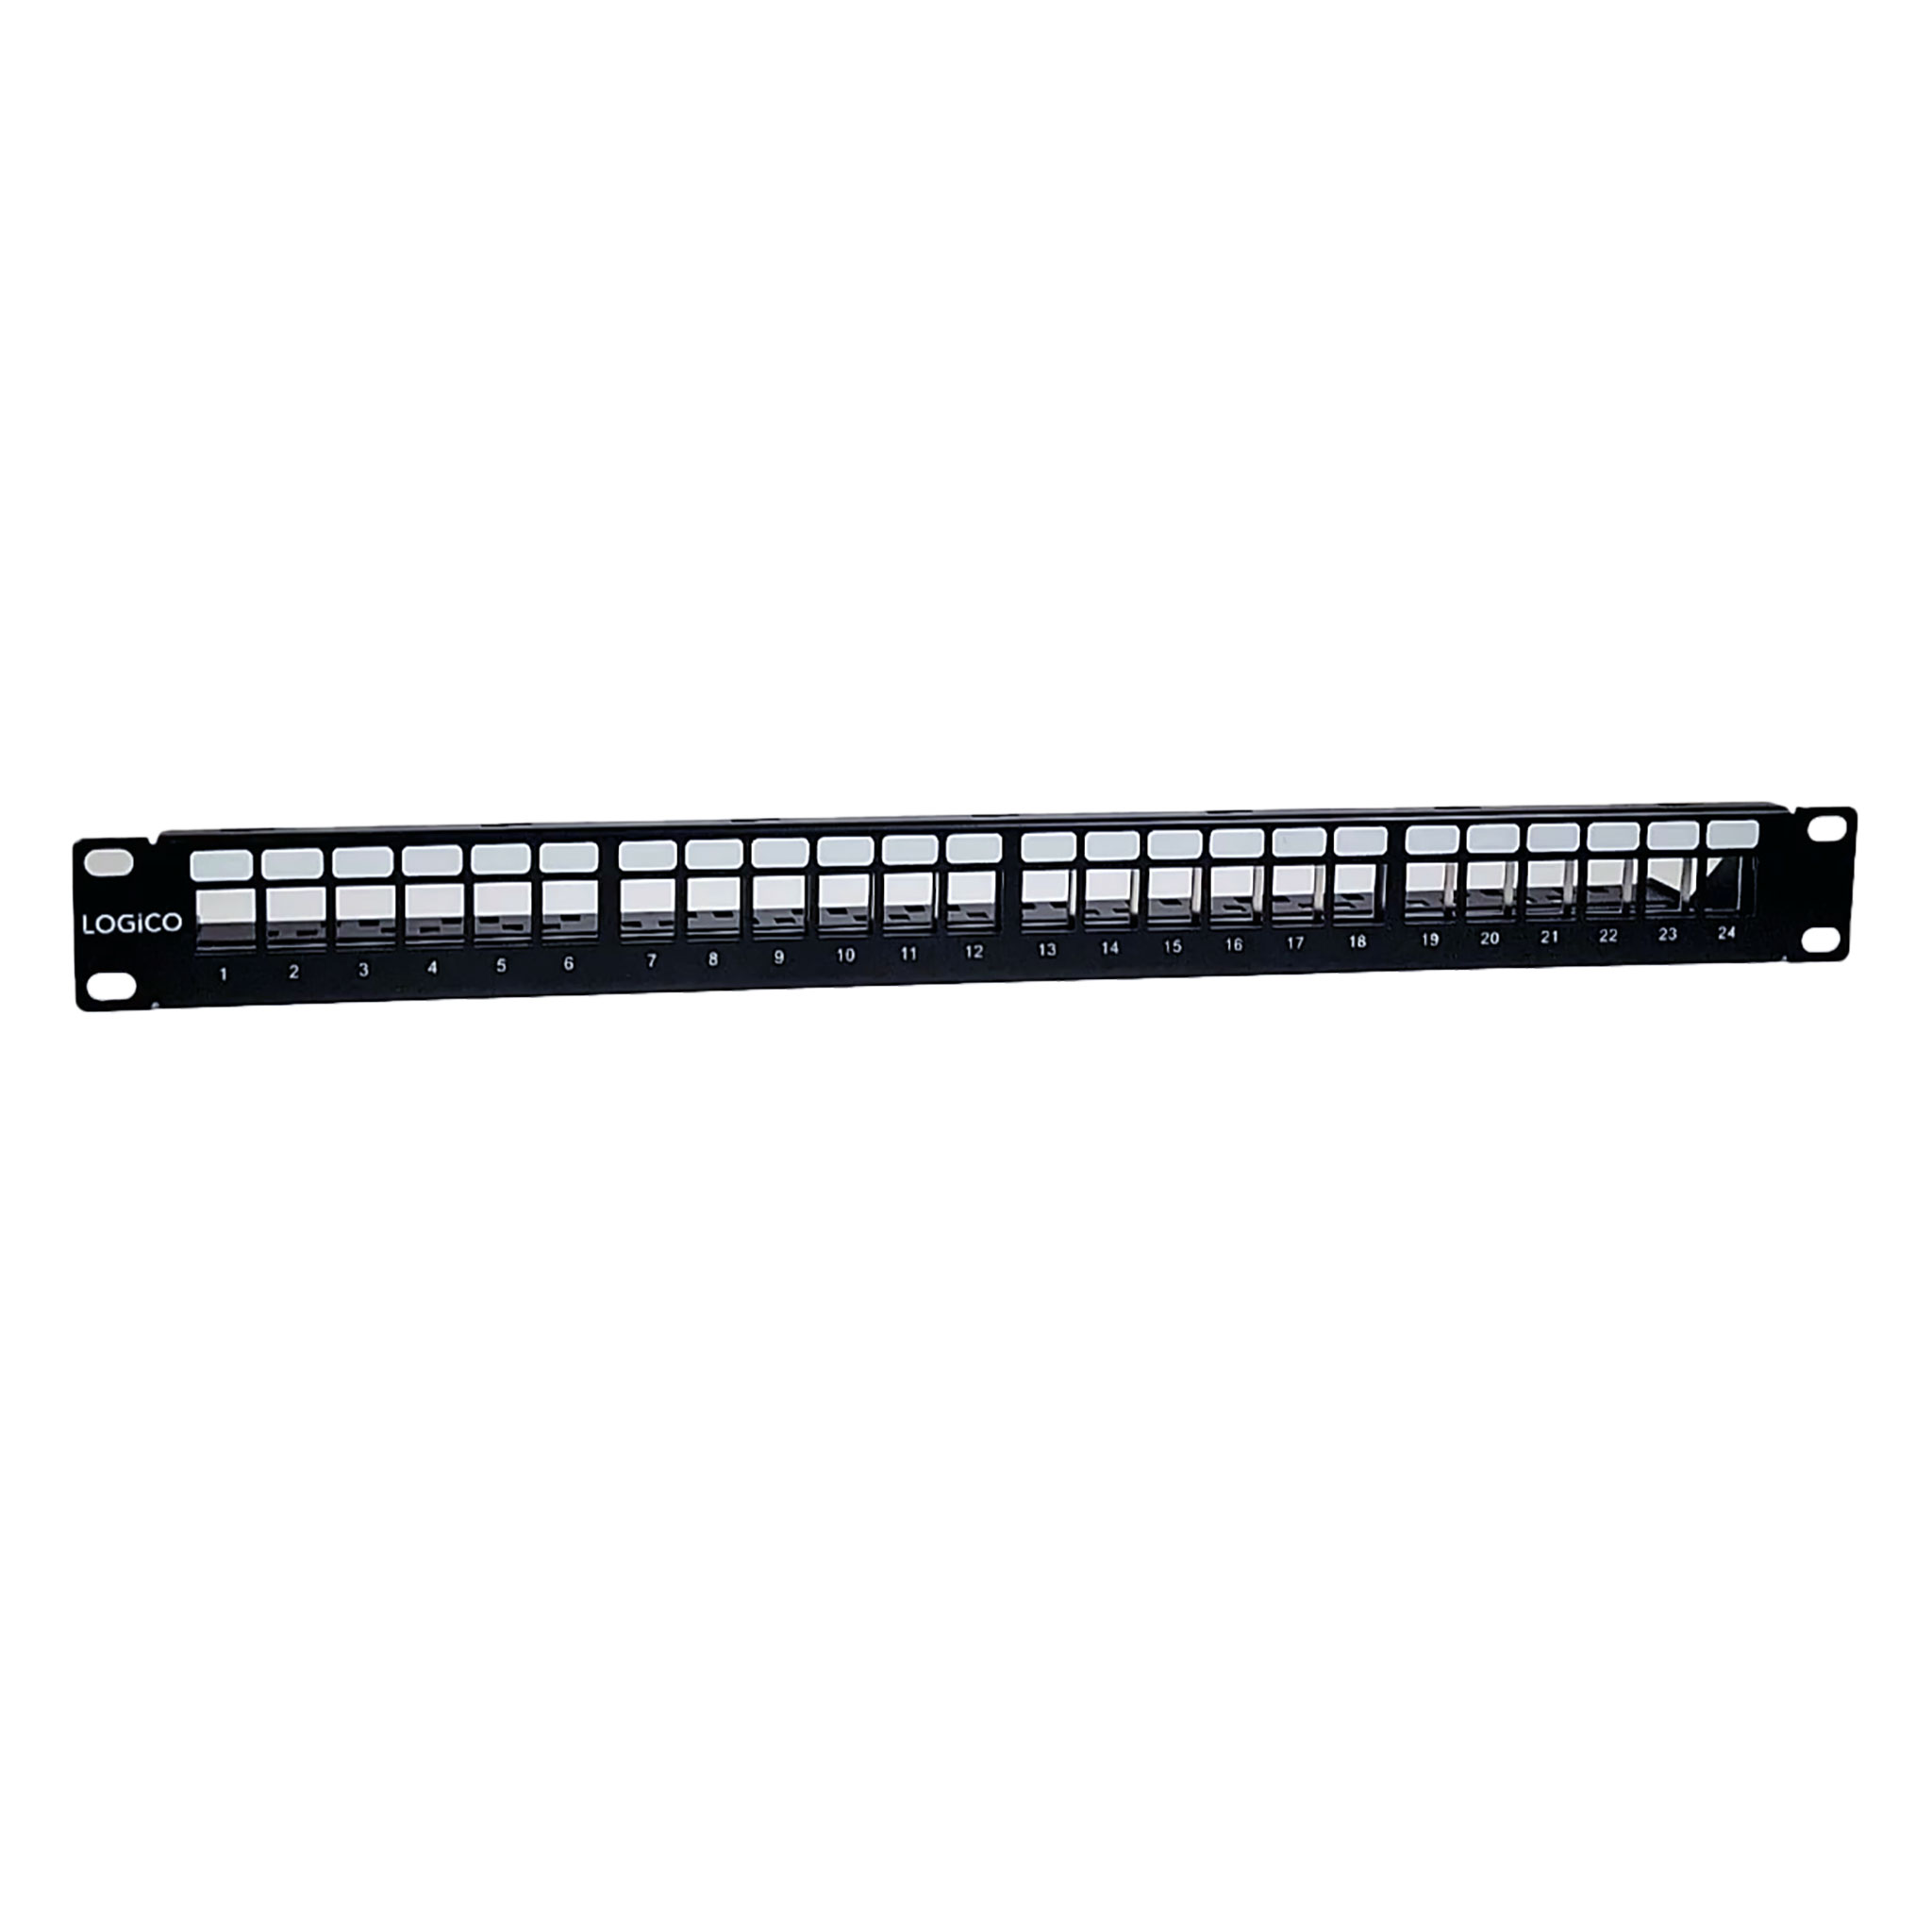 Cat5e Cat6 UTP 24 Port Network LAN Blank Patch Panel 1U with cable management